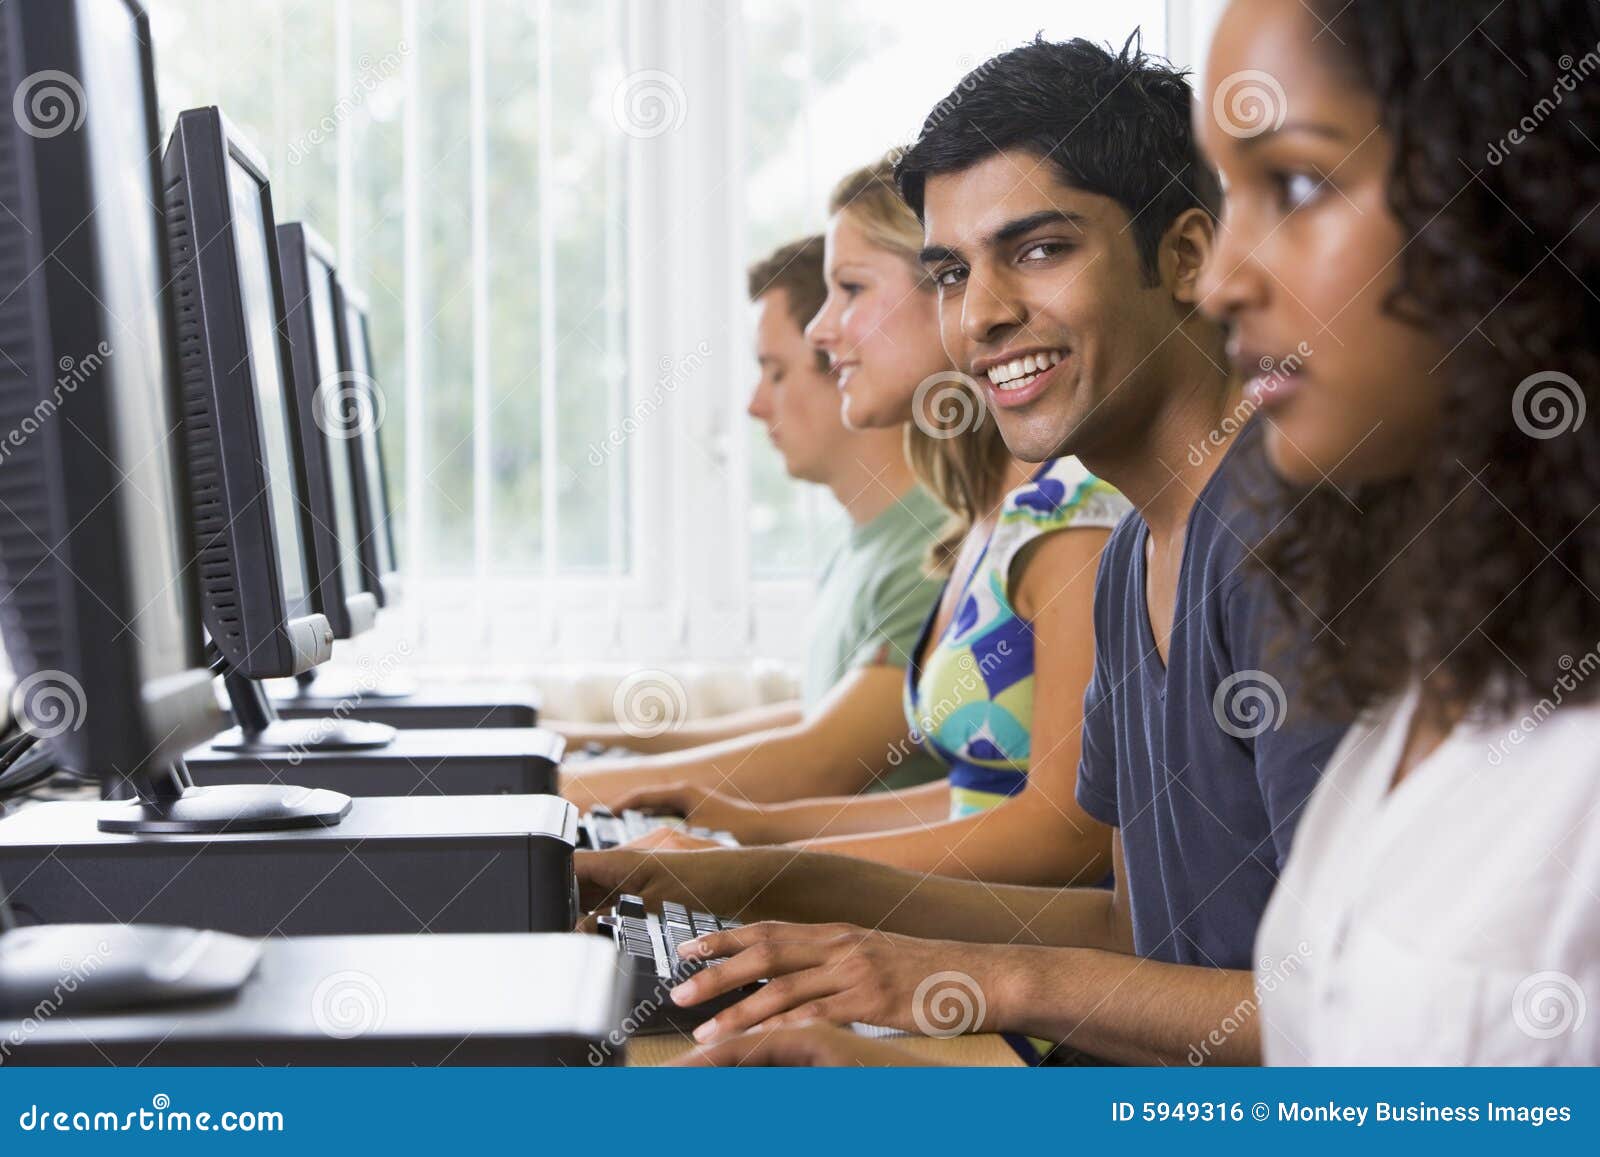 college students in a computer lab